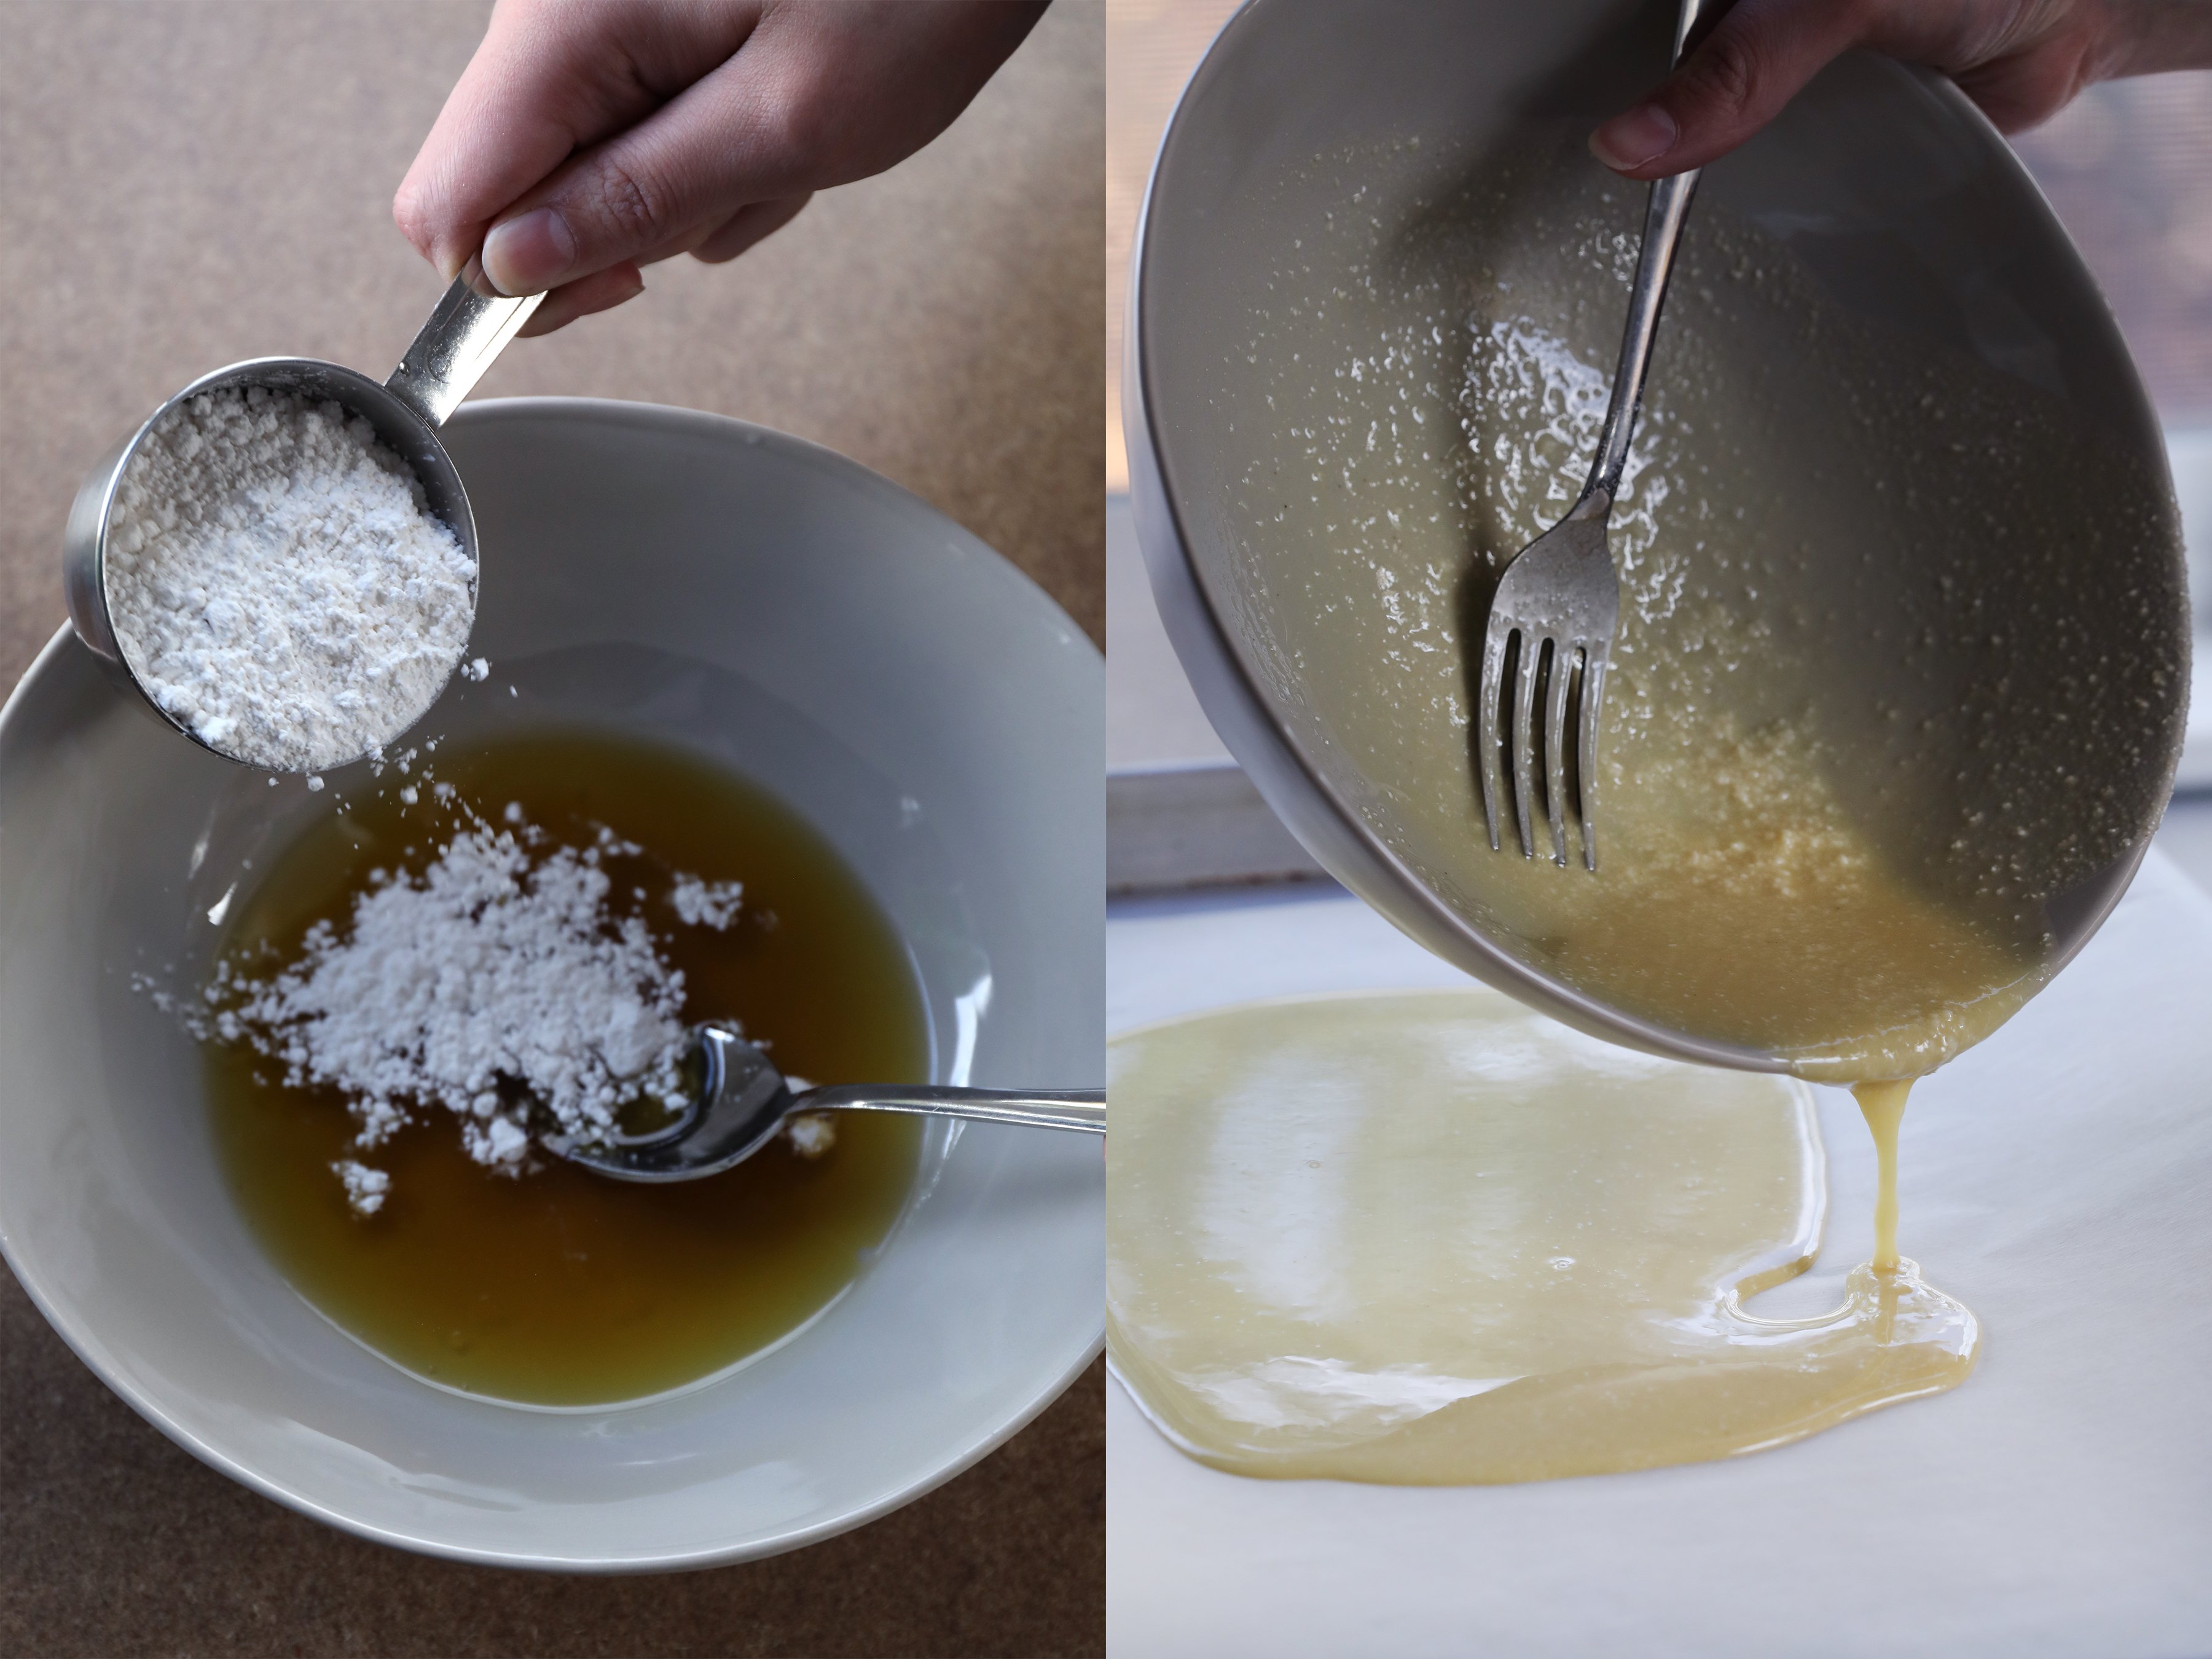 Two photos of hands pouring and sprinkling baking ingredients and mixtures